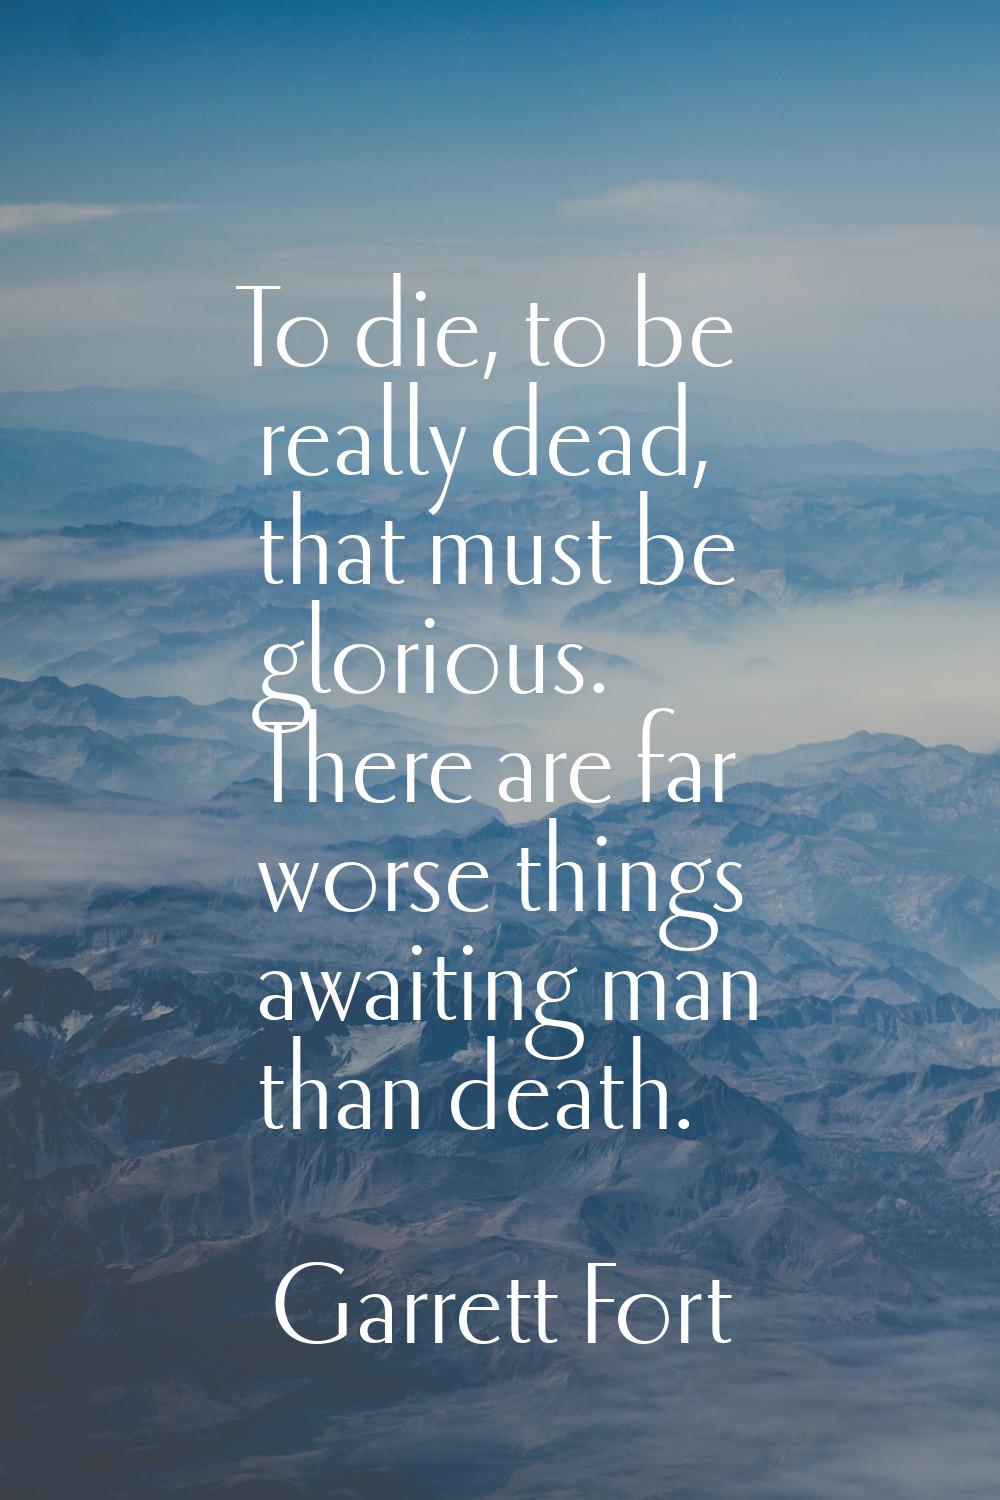 To die, to be really dead, that must be glorious. There are far worse things awaiting man than deat